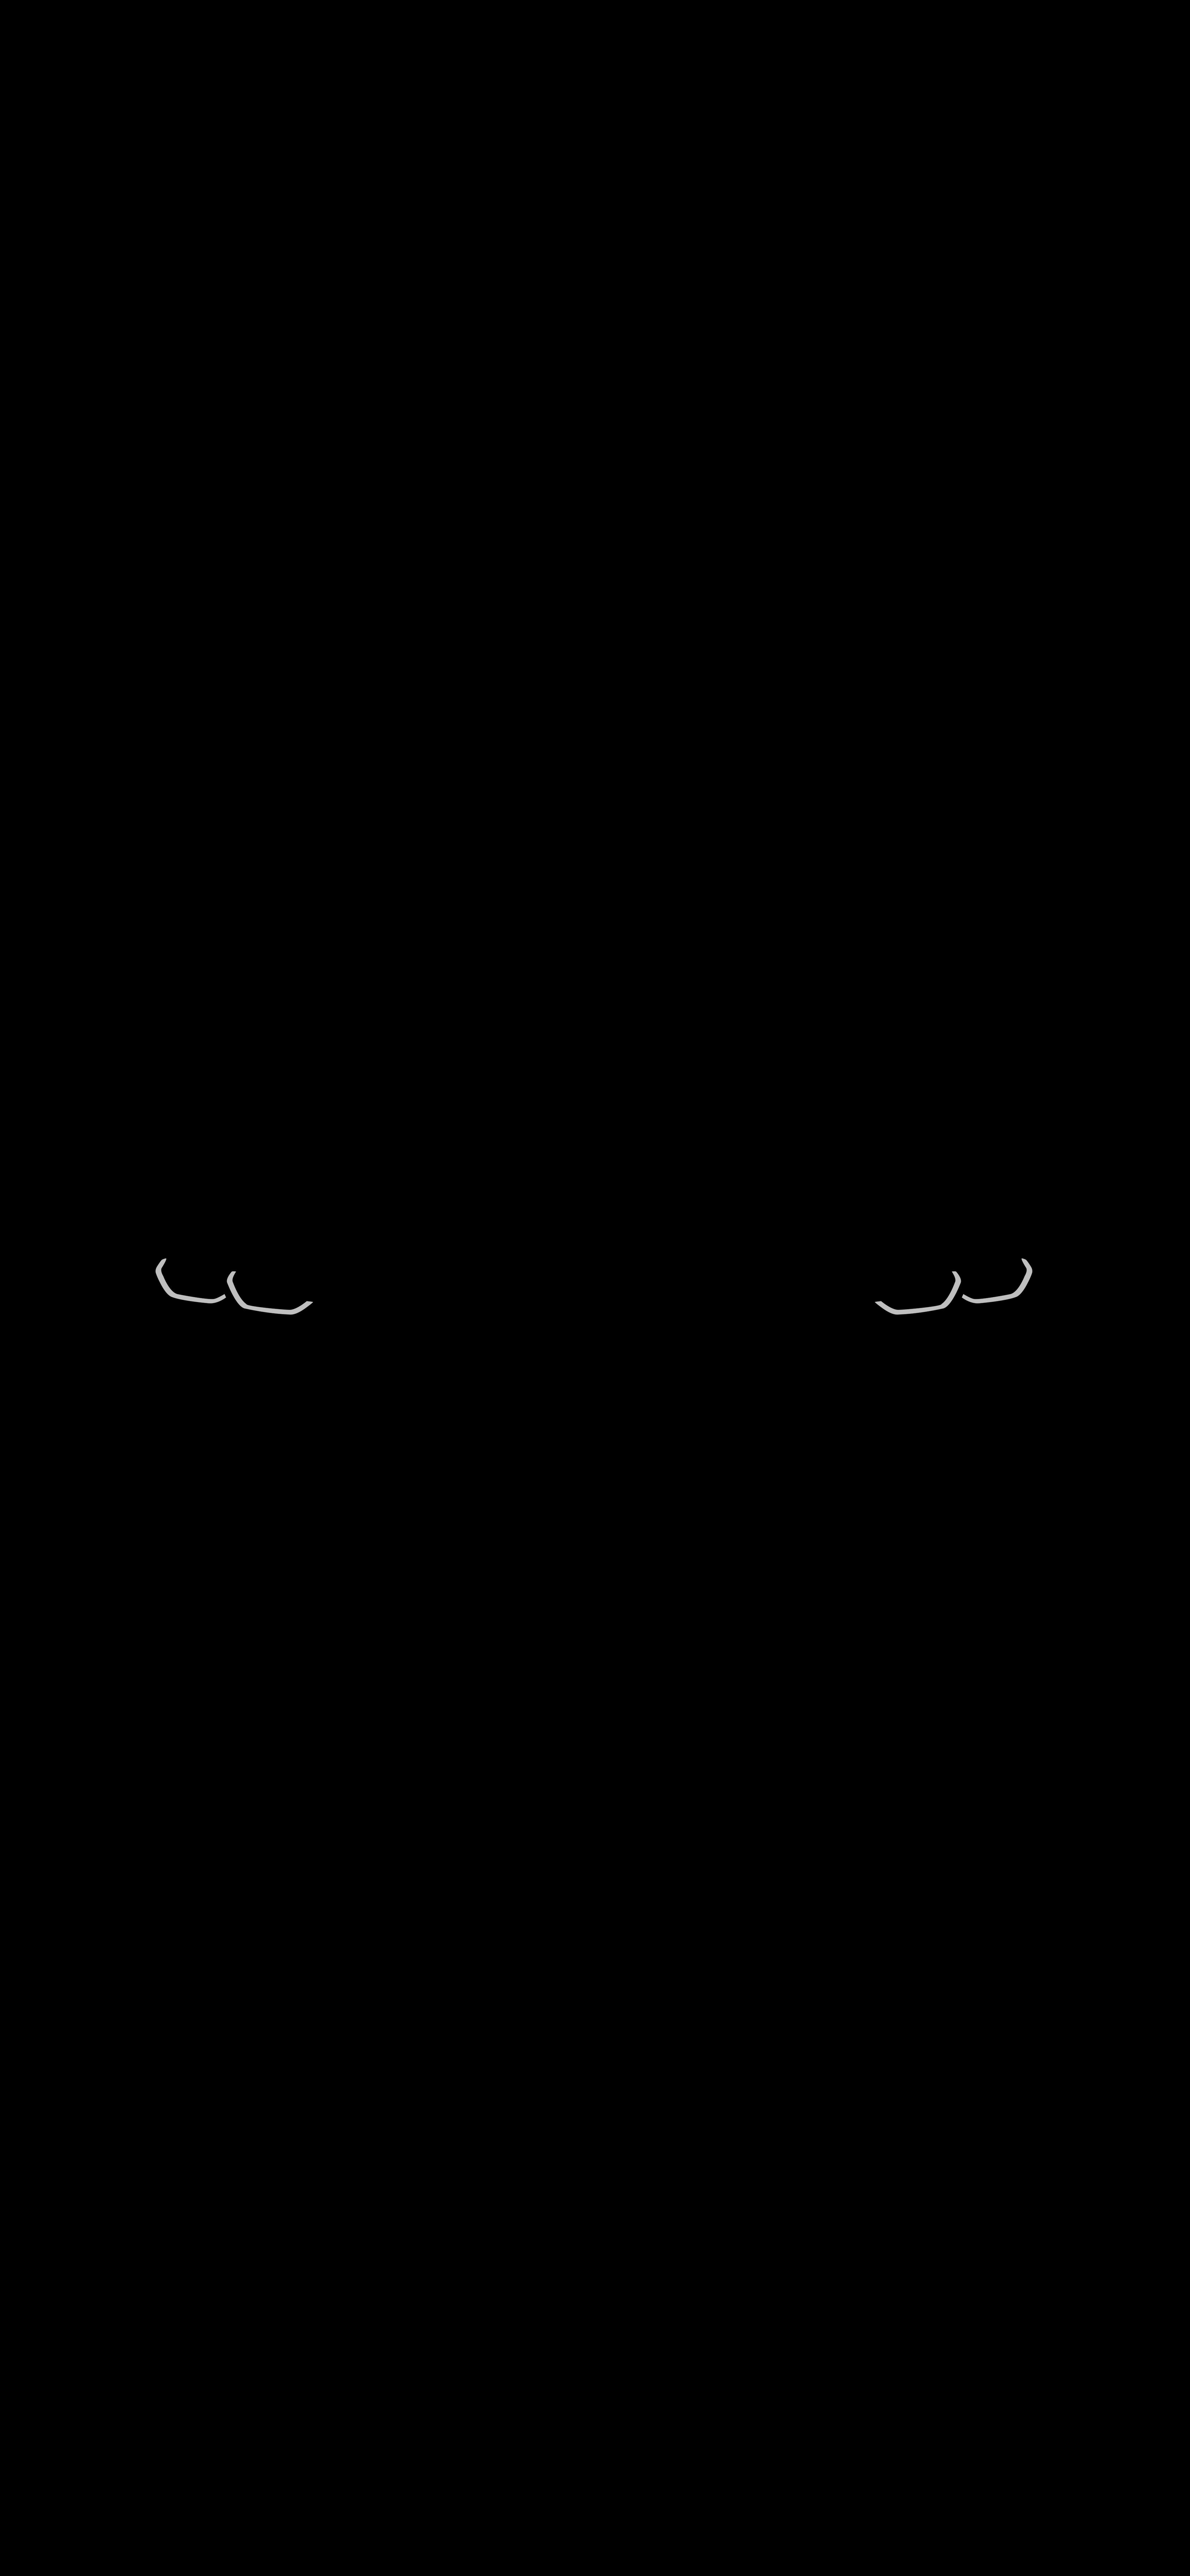 Smile Face Beautiful abstract bonito black desenho face modern  simple HD phone wallpaper  Peakpx